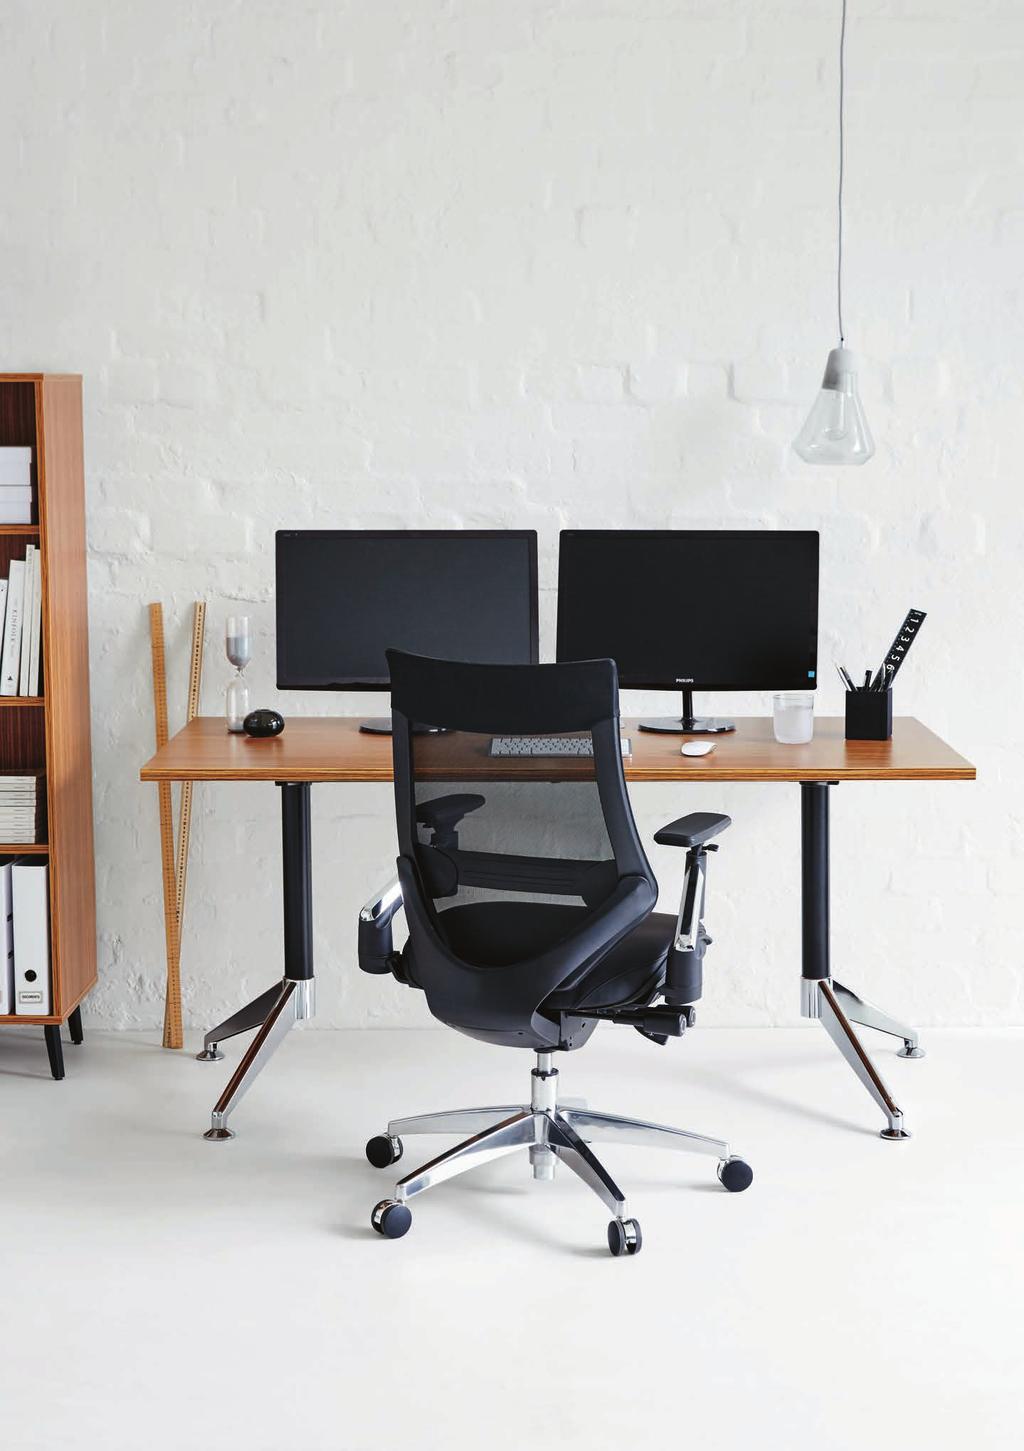 Seating Seating Our wide selection of business-grade chairs includes ergonomic task chairs, stylish and comfortable